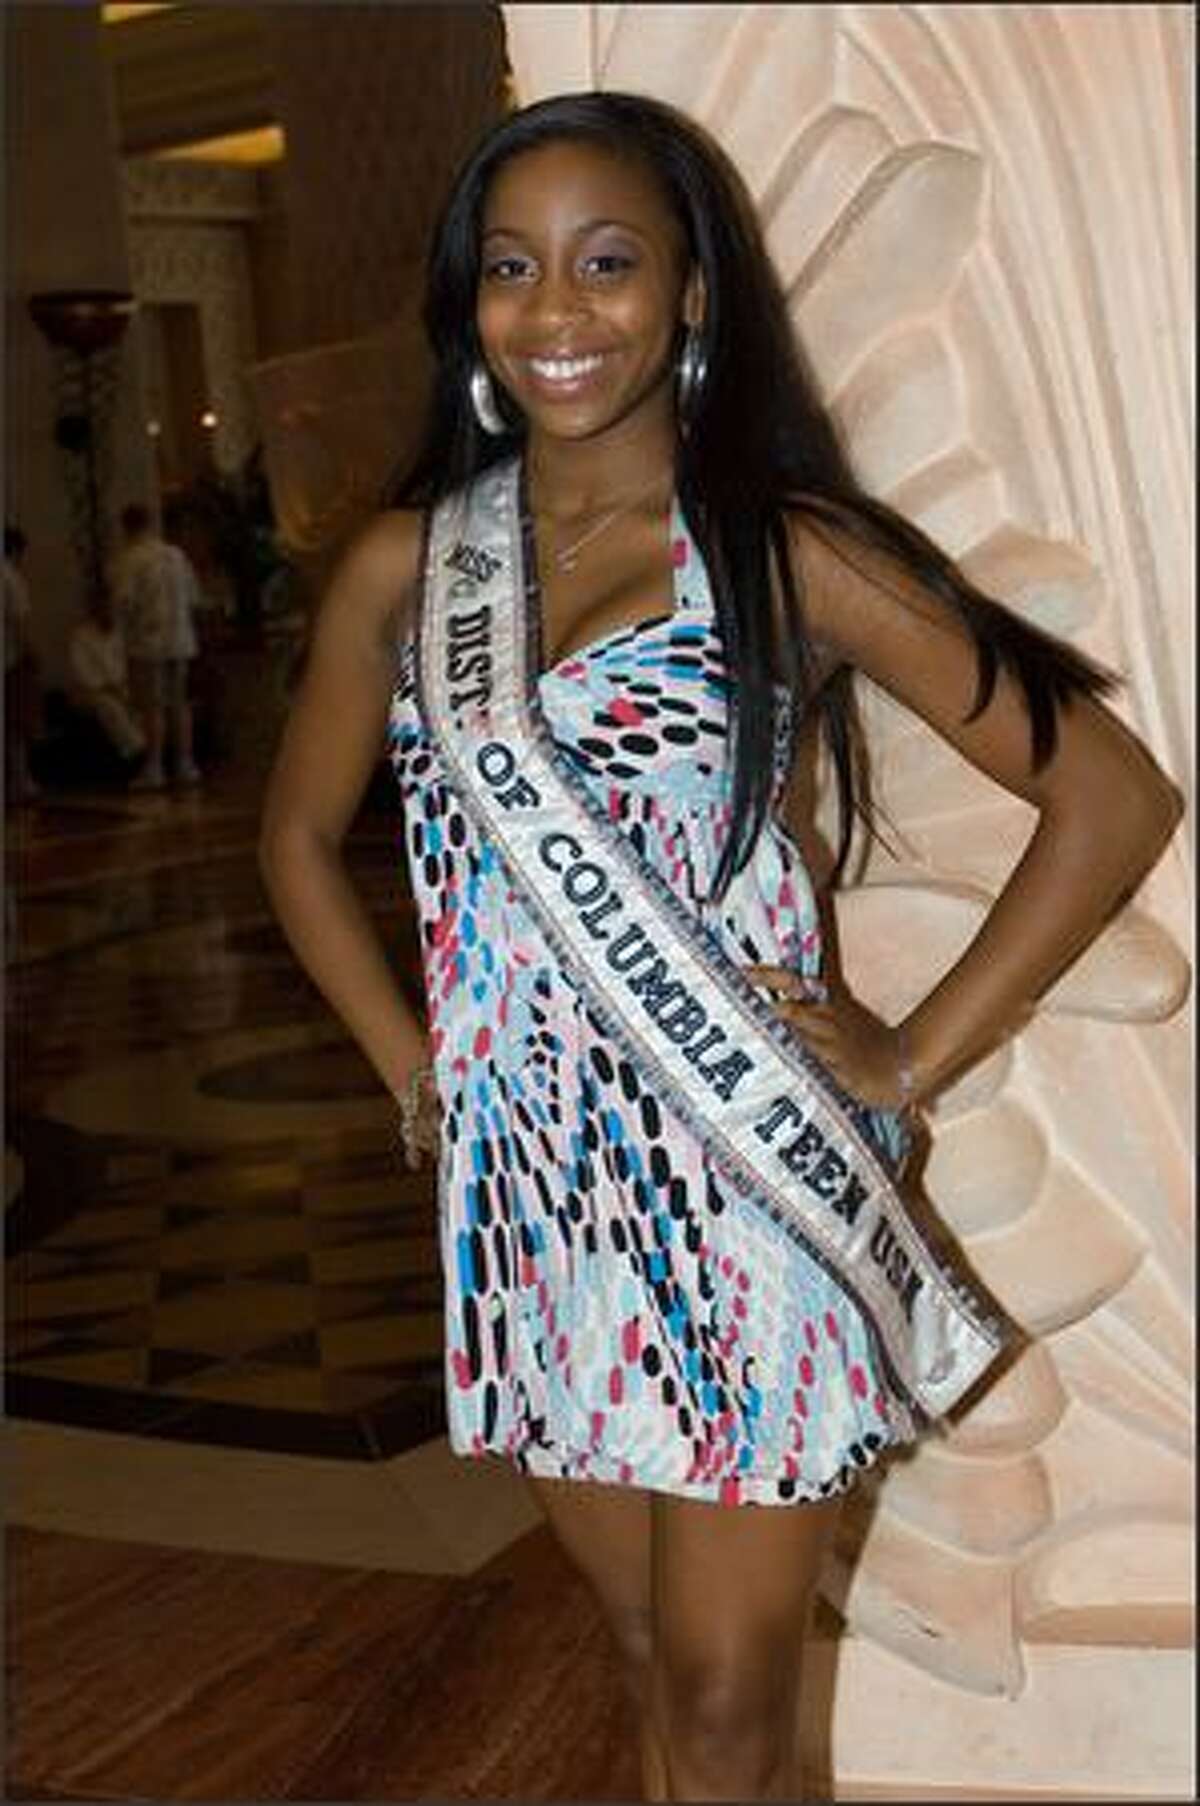 Ivana Grace, Miss District of Columbia USA 2008, arrives in the Royal Tower lobby at Atlantis on Tuesday.